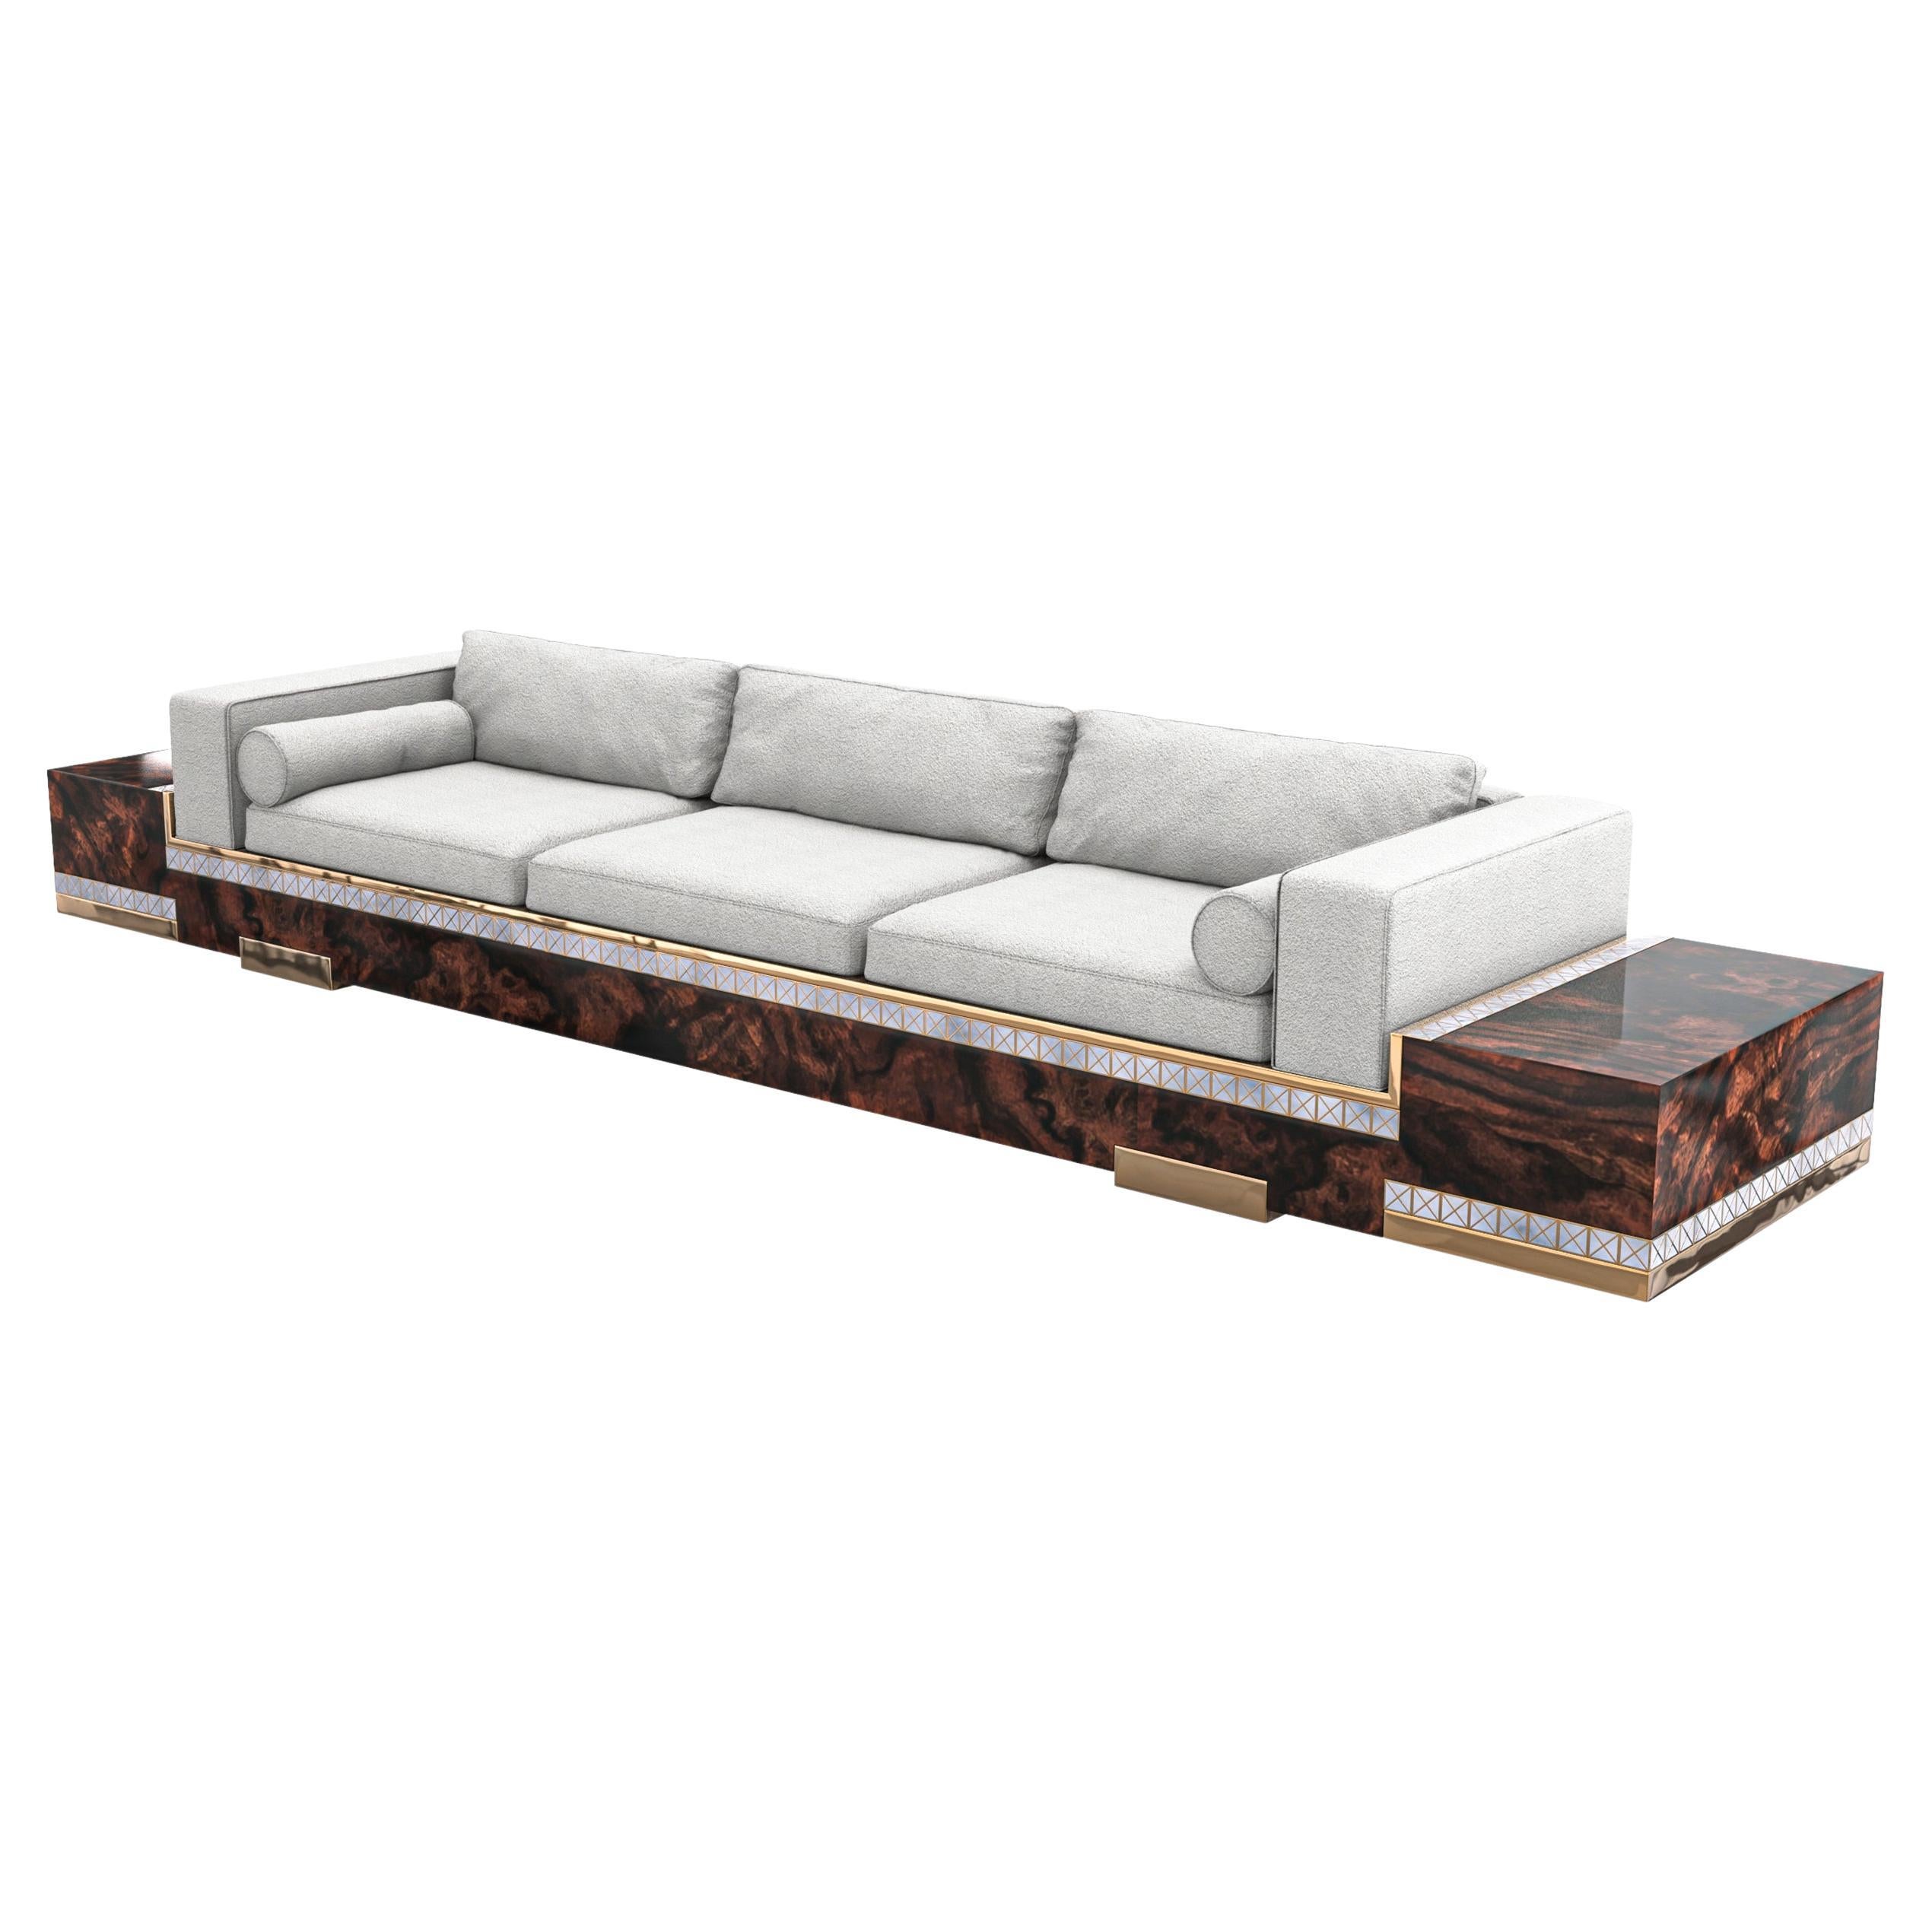 "La Perla Prescelta" Sofa Together With "The Art Of Mother Of Pearl Inlay" For Sale